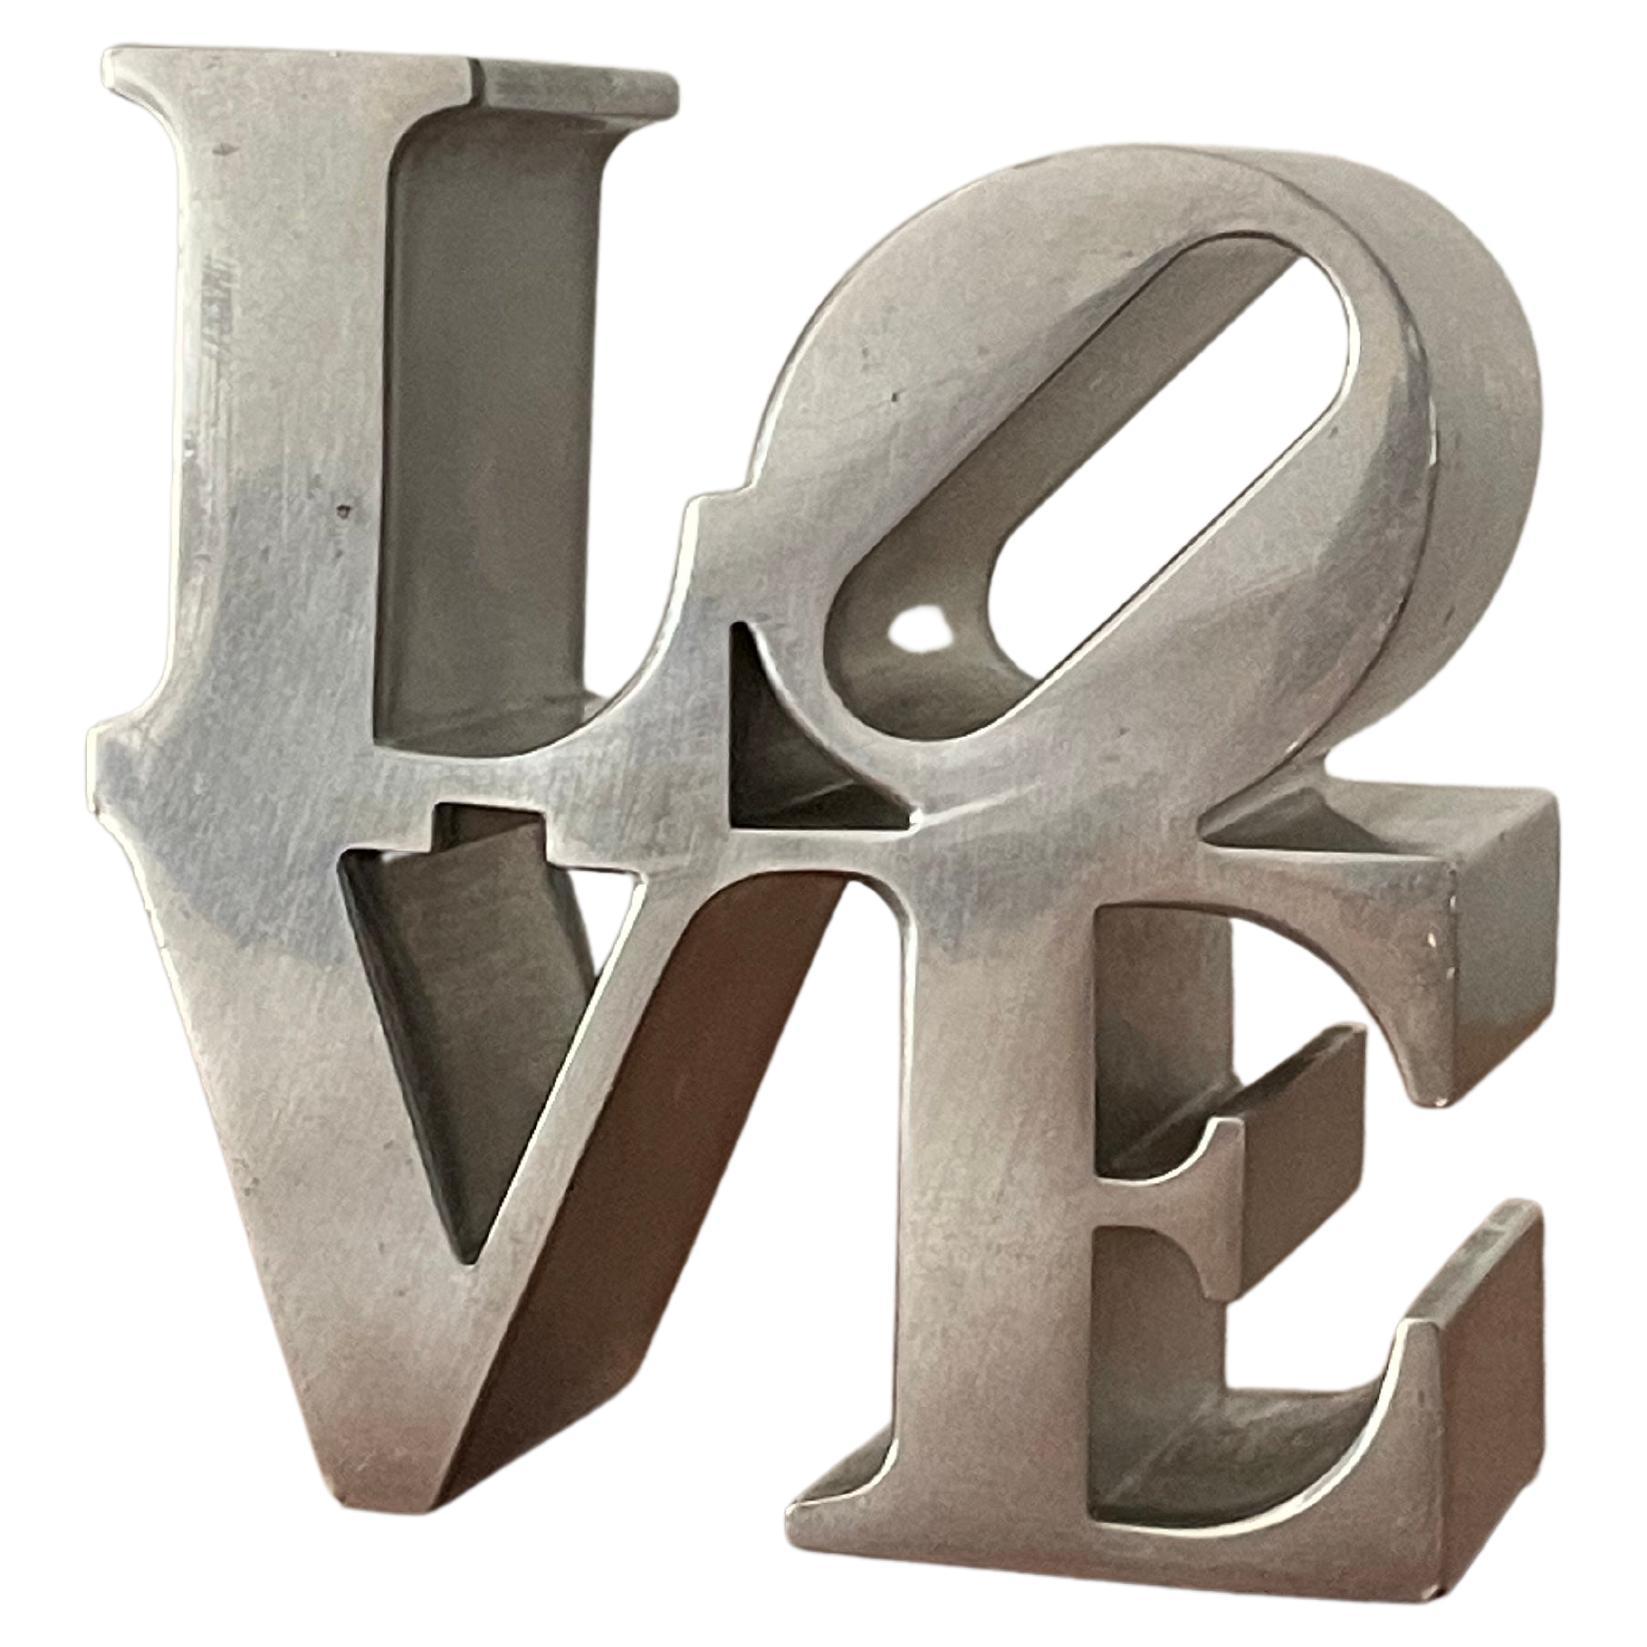 Robert Indiana Love Paperweight or Small Sculpture